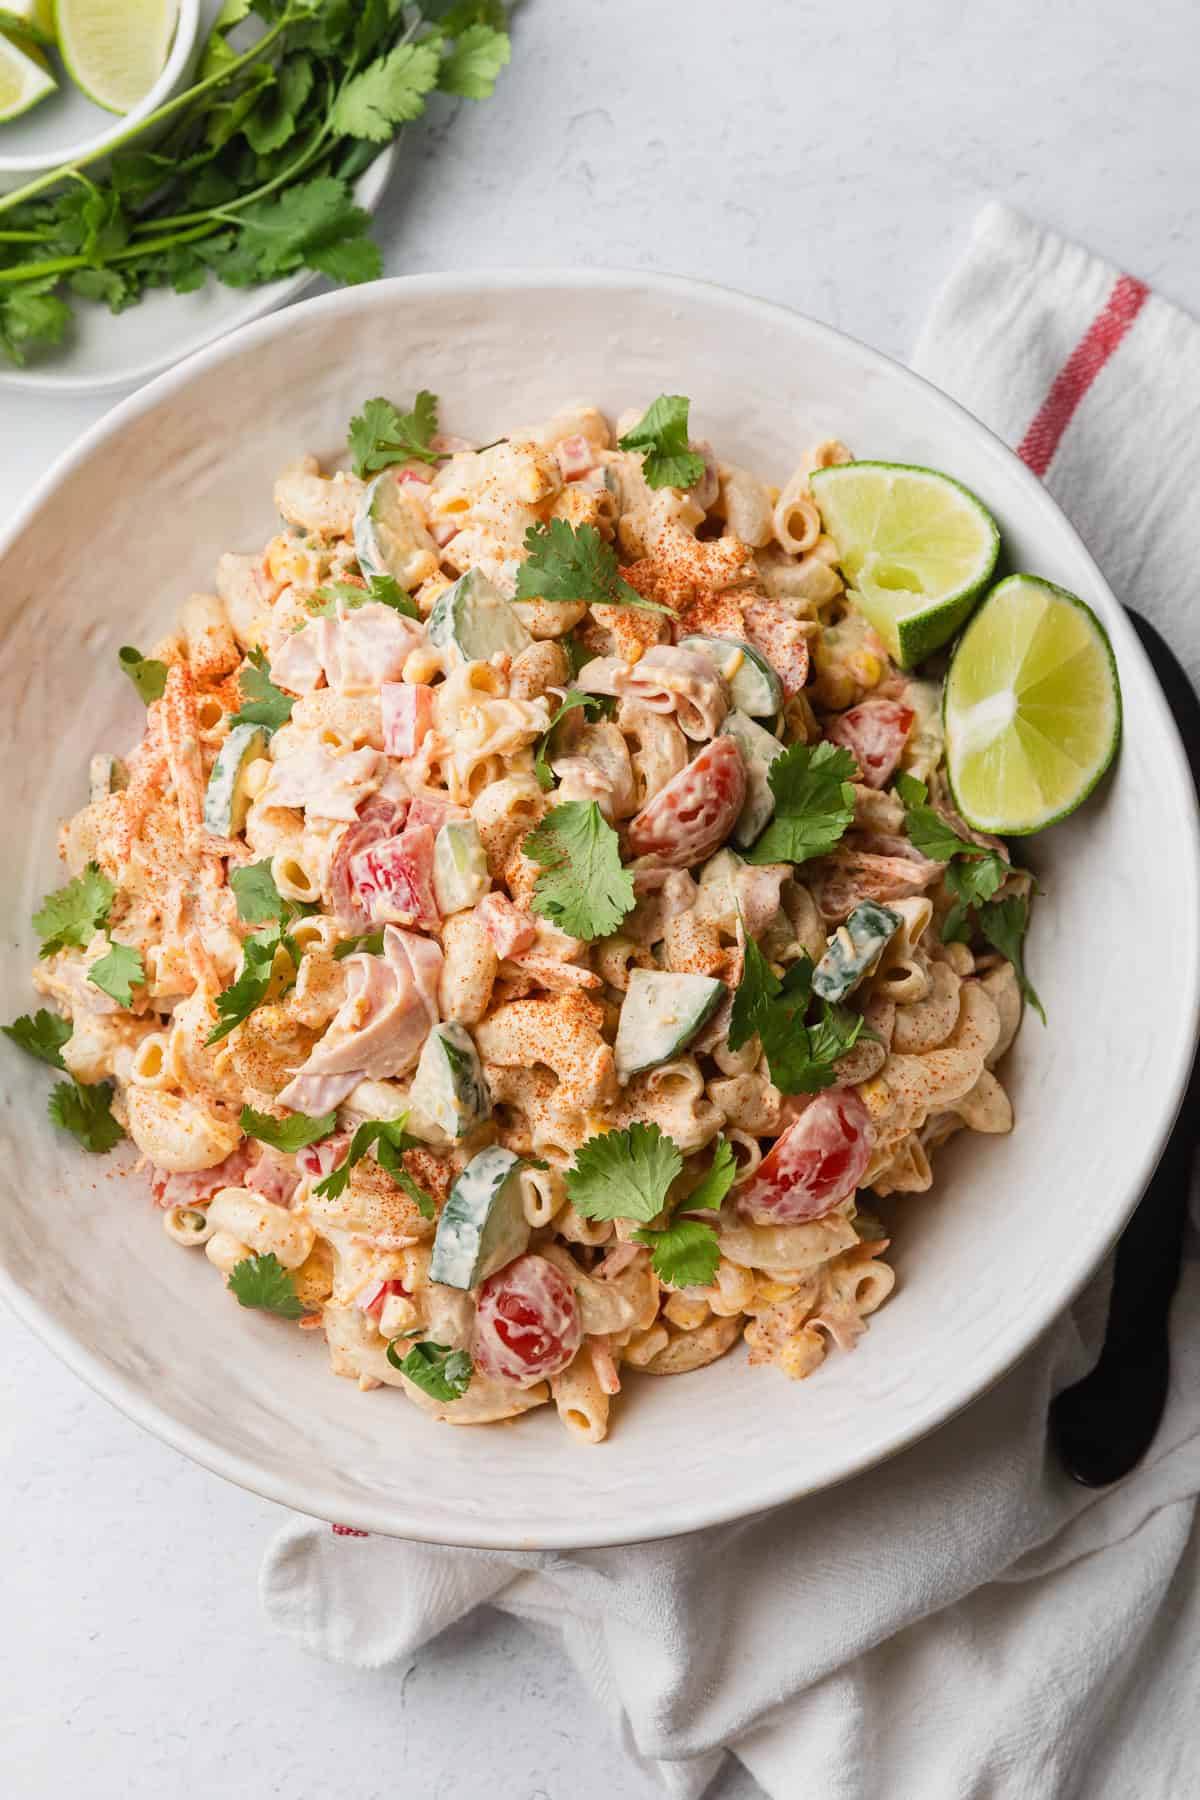 Mexican macaroni salad recipe in a white bowl with lime wedges and cilantro leaves.